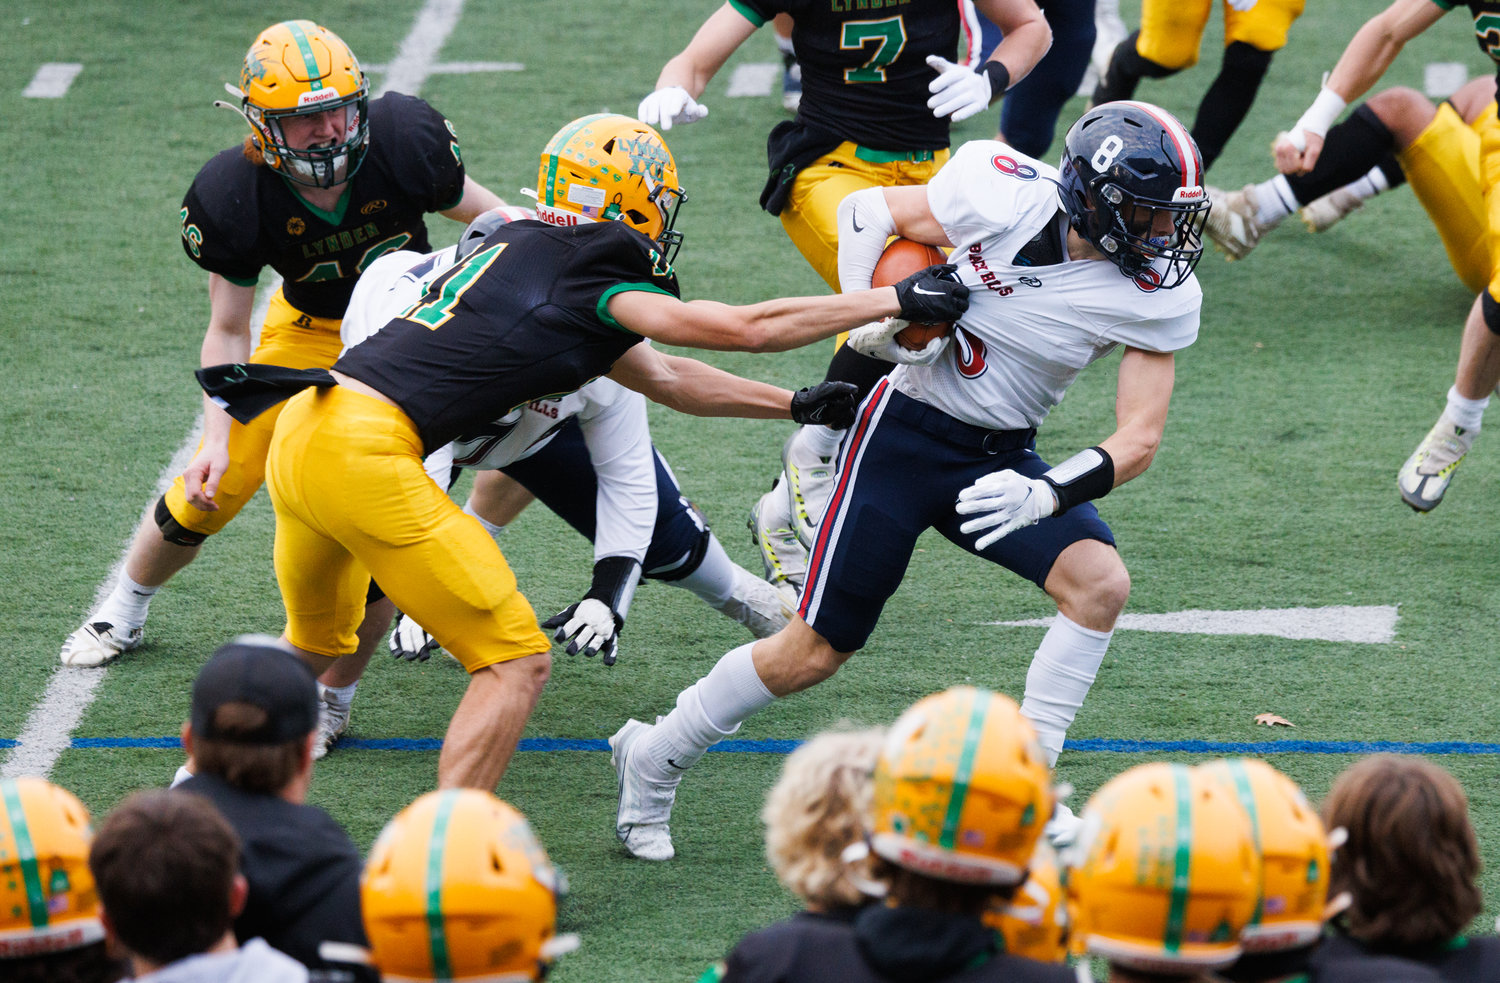 Black Hills’ Braiden Bond tries to get out from the grip of a Lynden defender as Lynden beat Black Hills 54-7 on Friday in Bellingham.